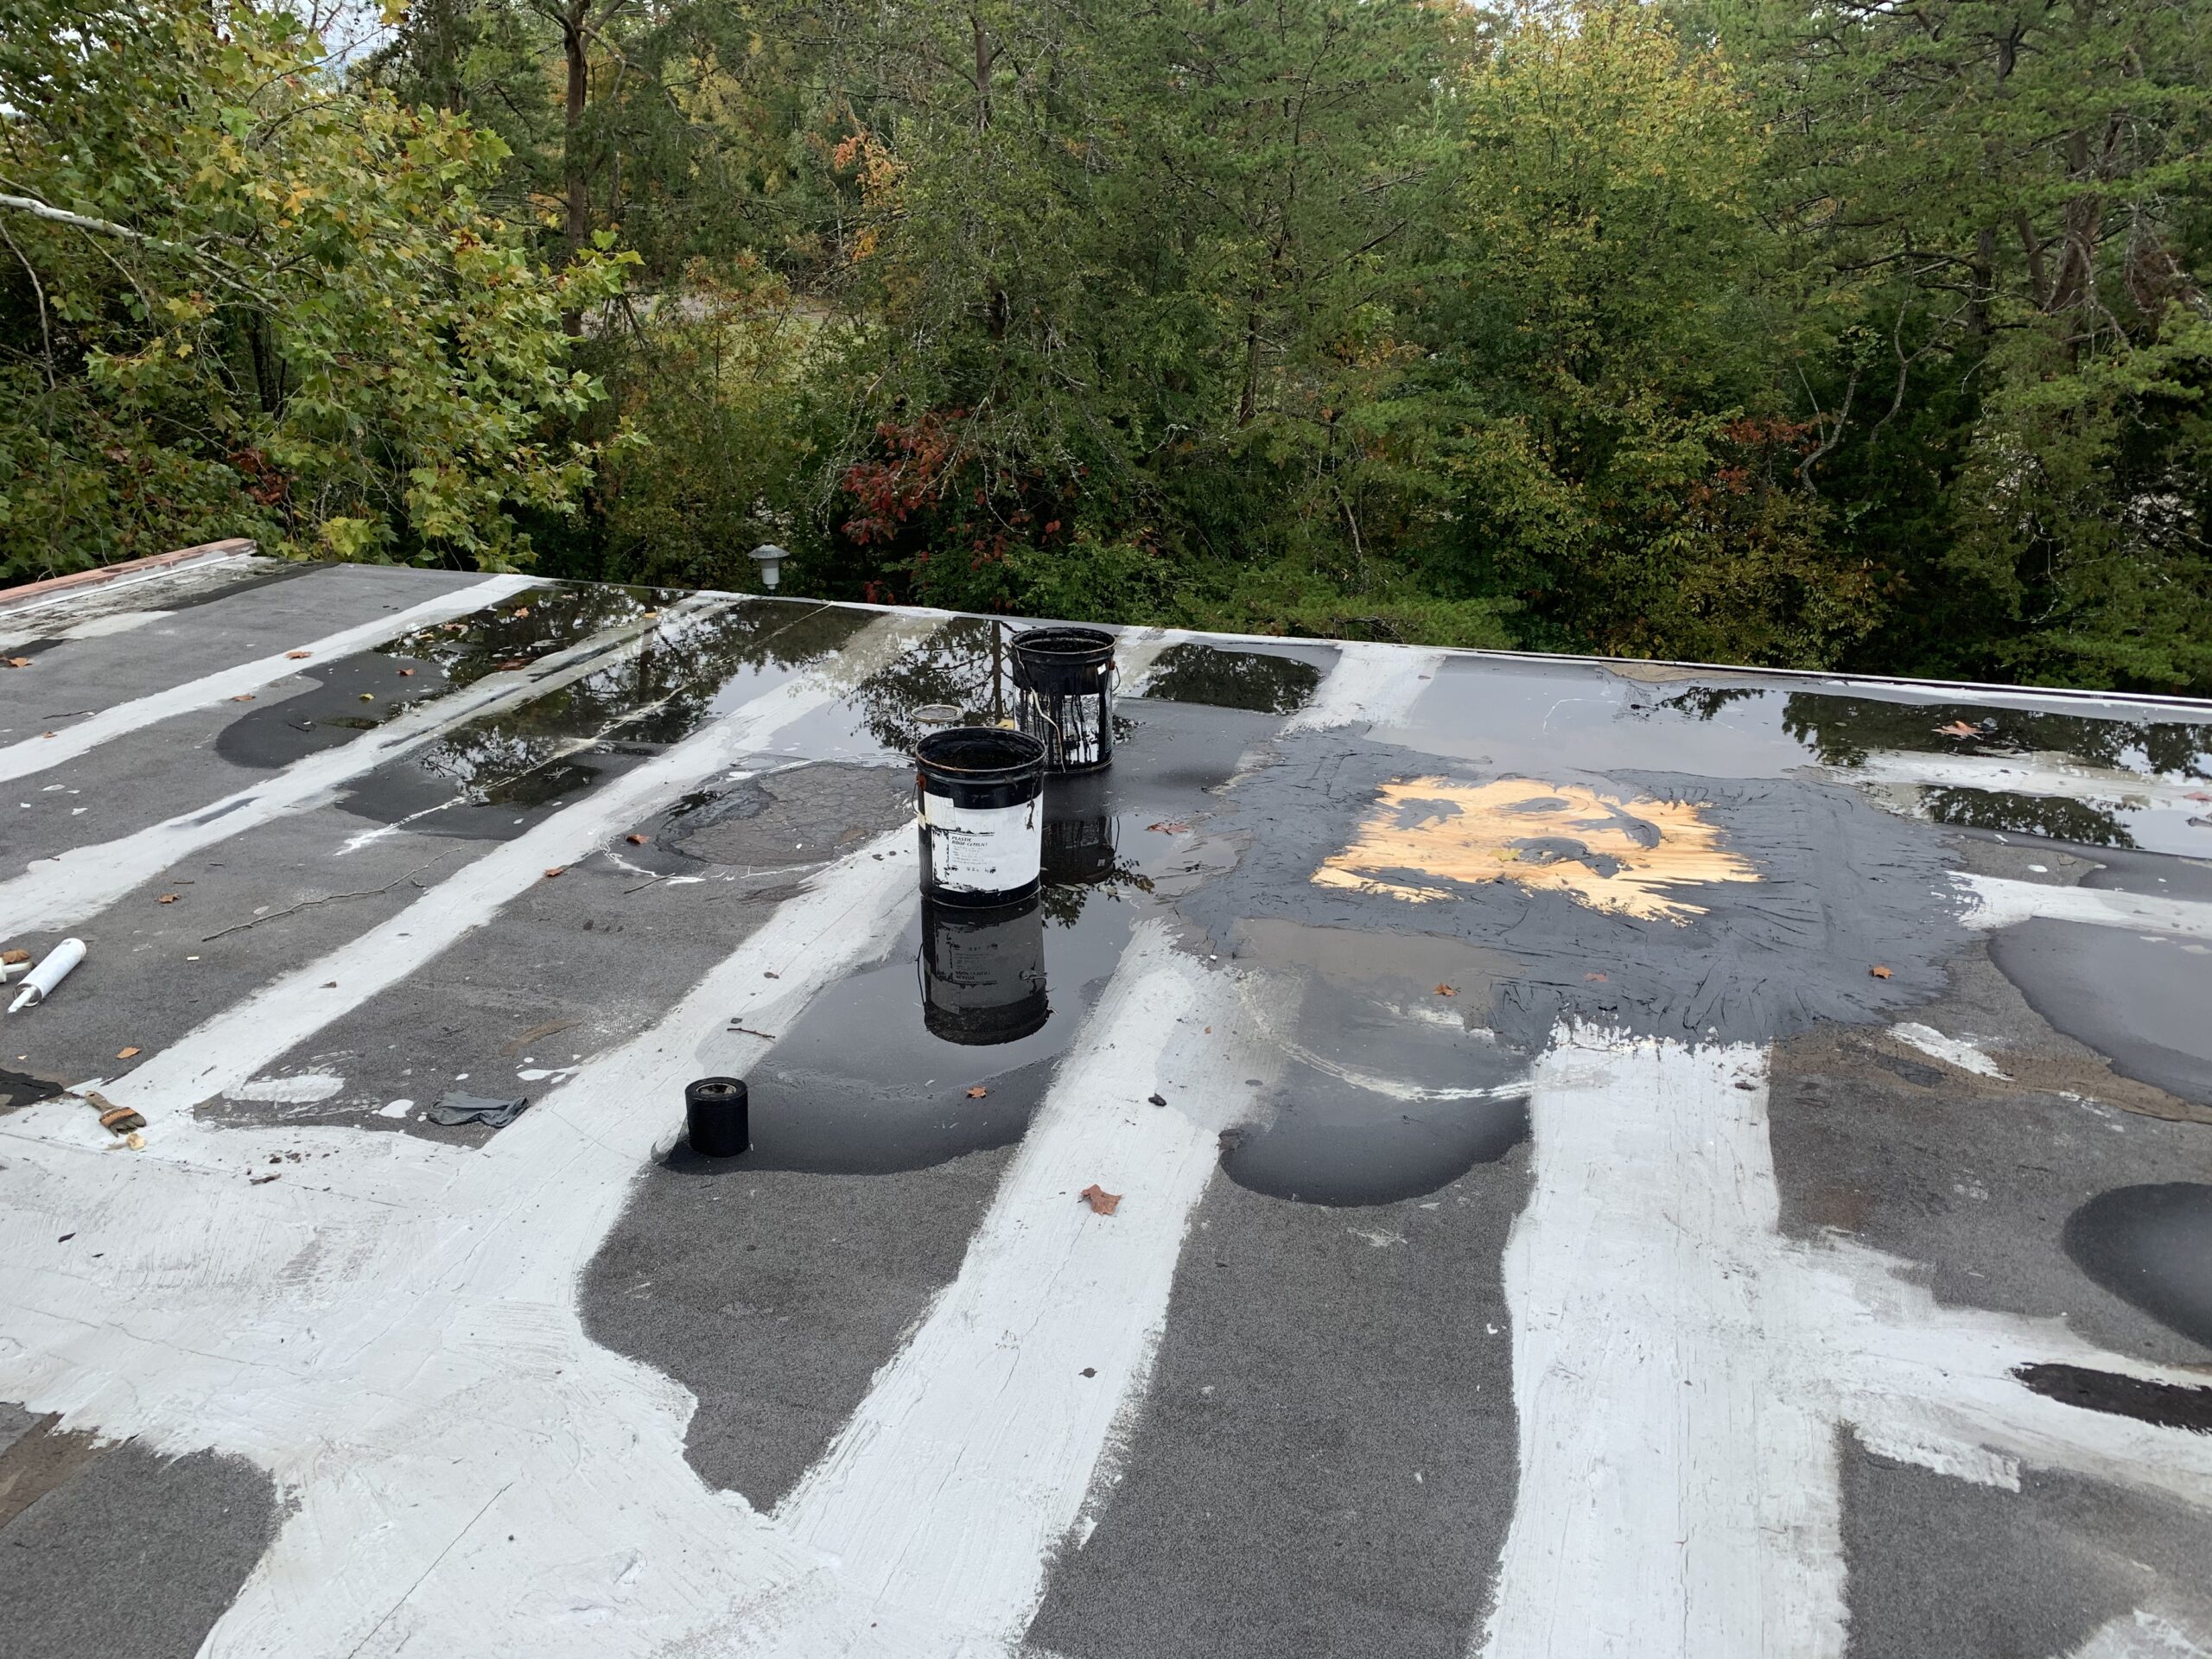 Flat roof ponding water